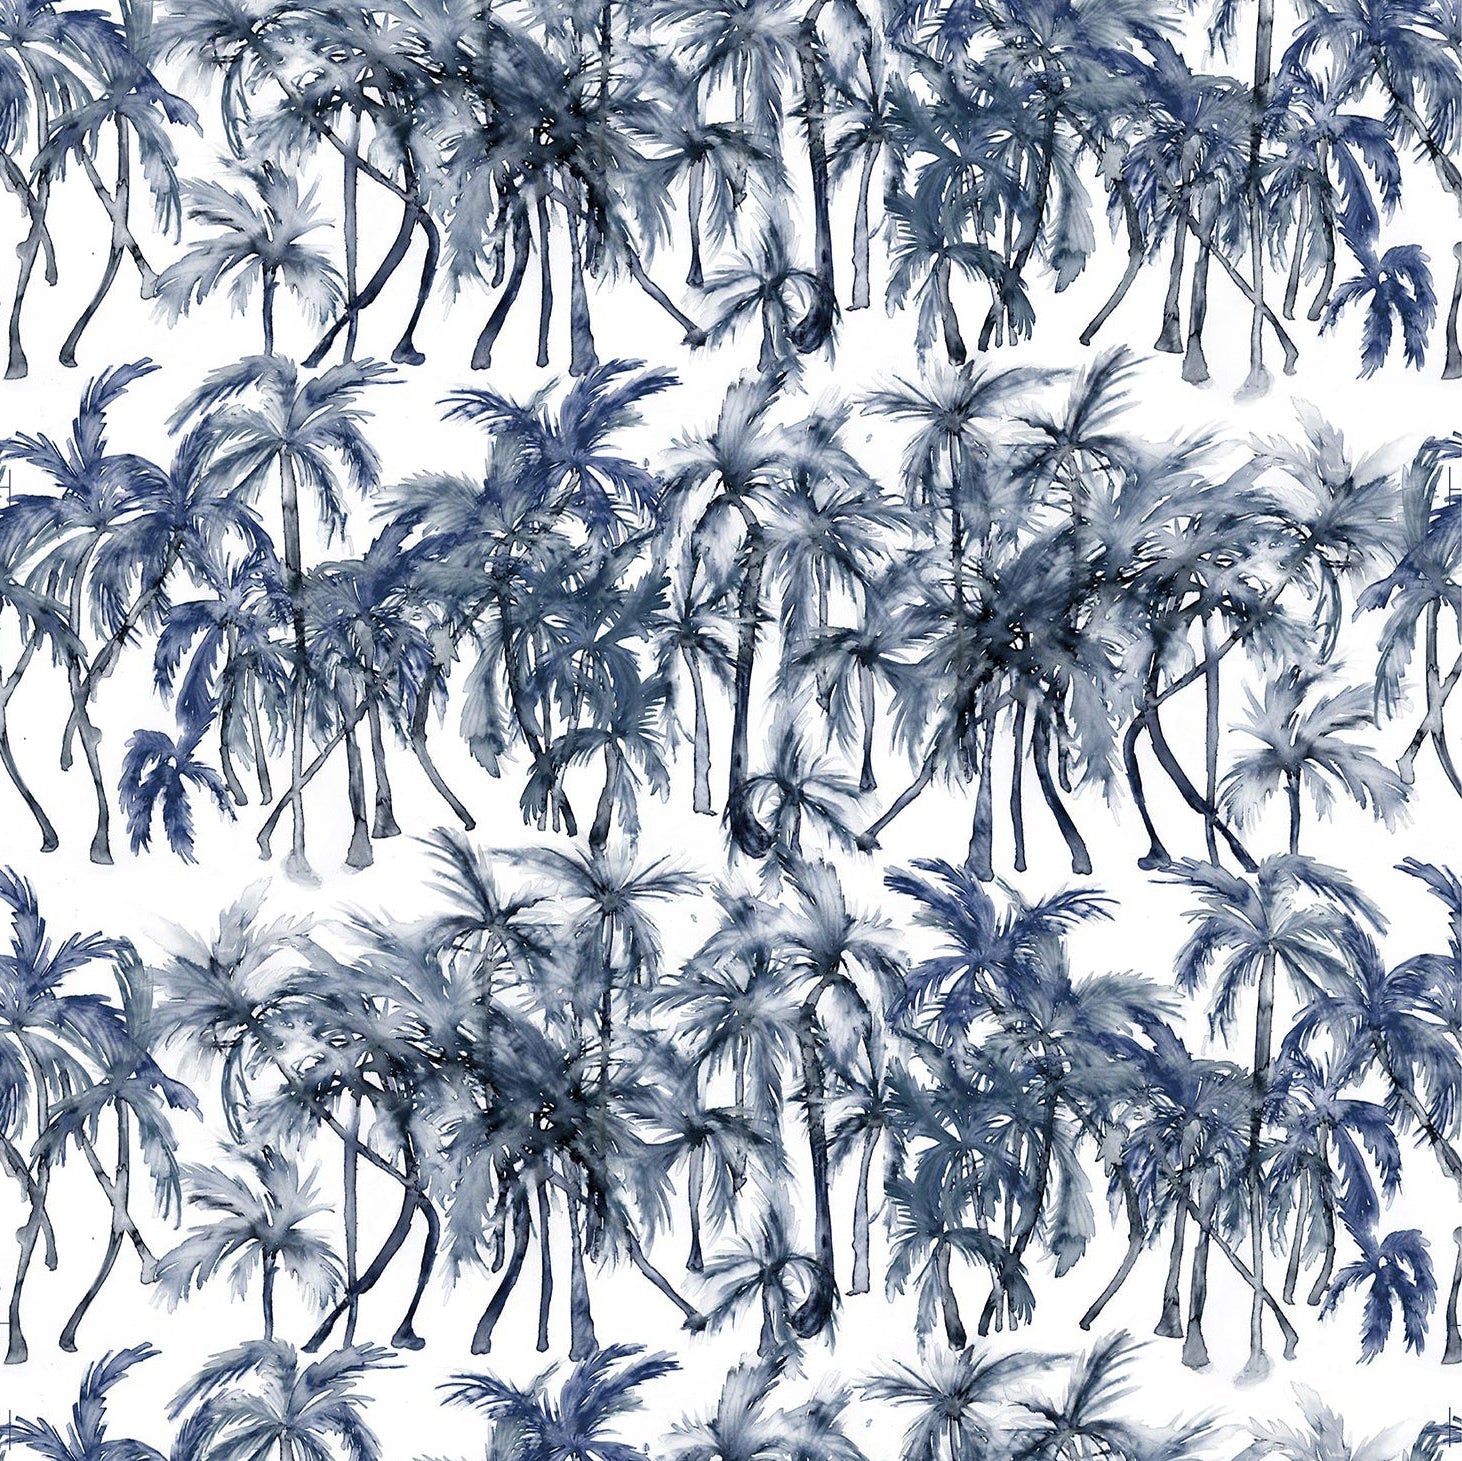 Detail of wallpaper in a painterly palm tree stripe print in shades of navy and gray on a white field.